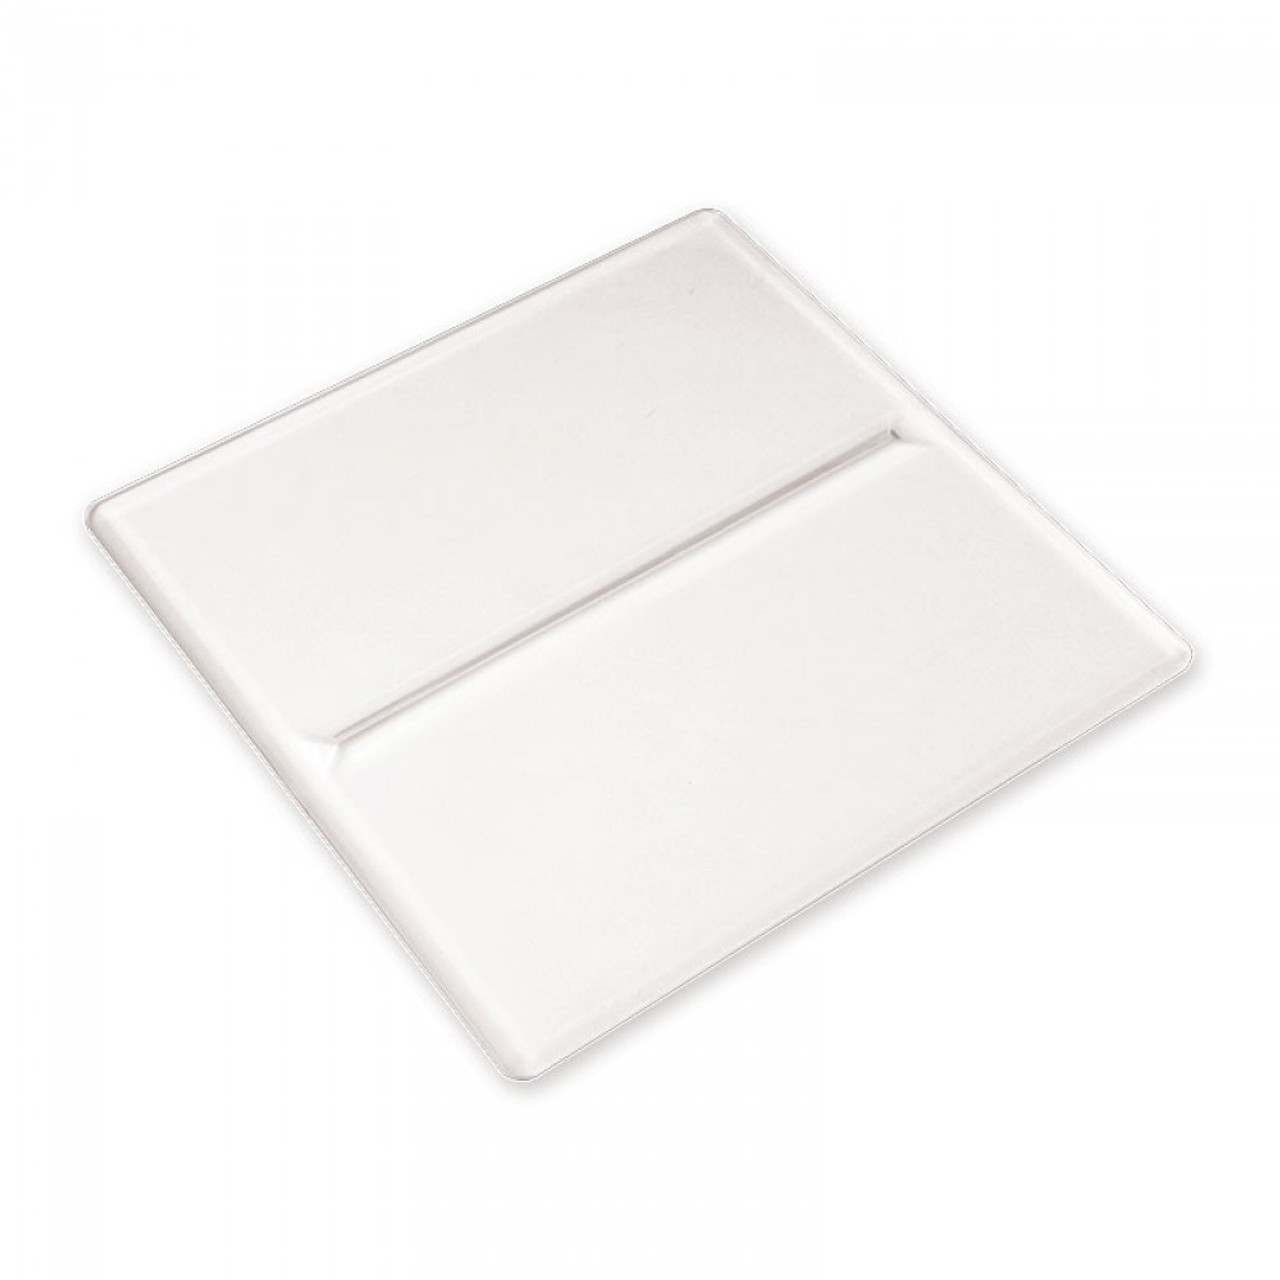 Sizzix Cutting Pad - 2 count